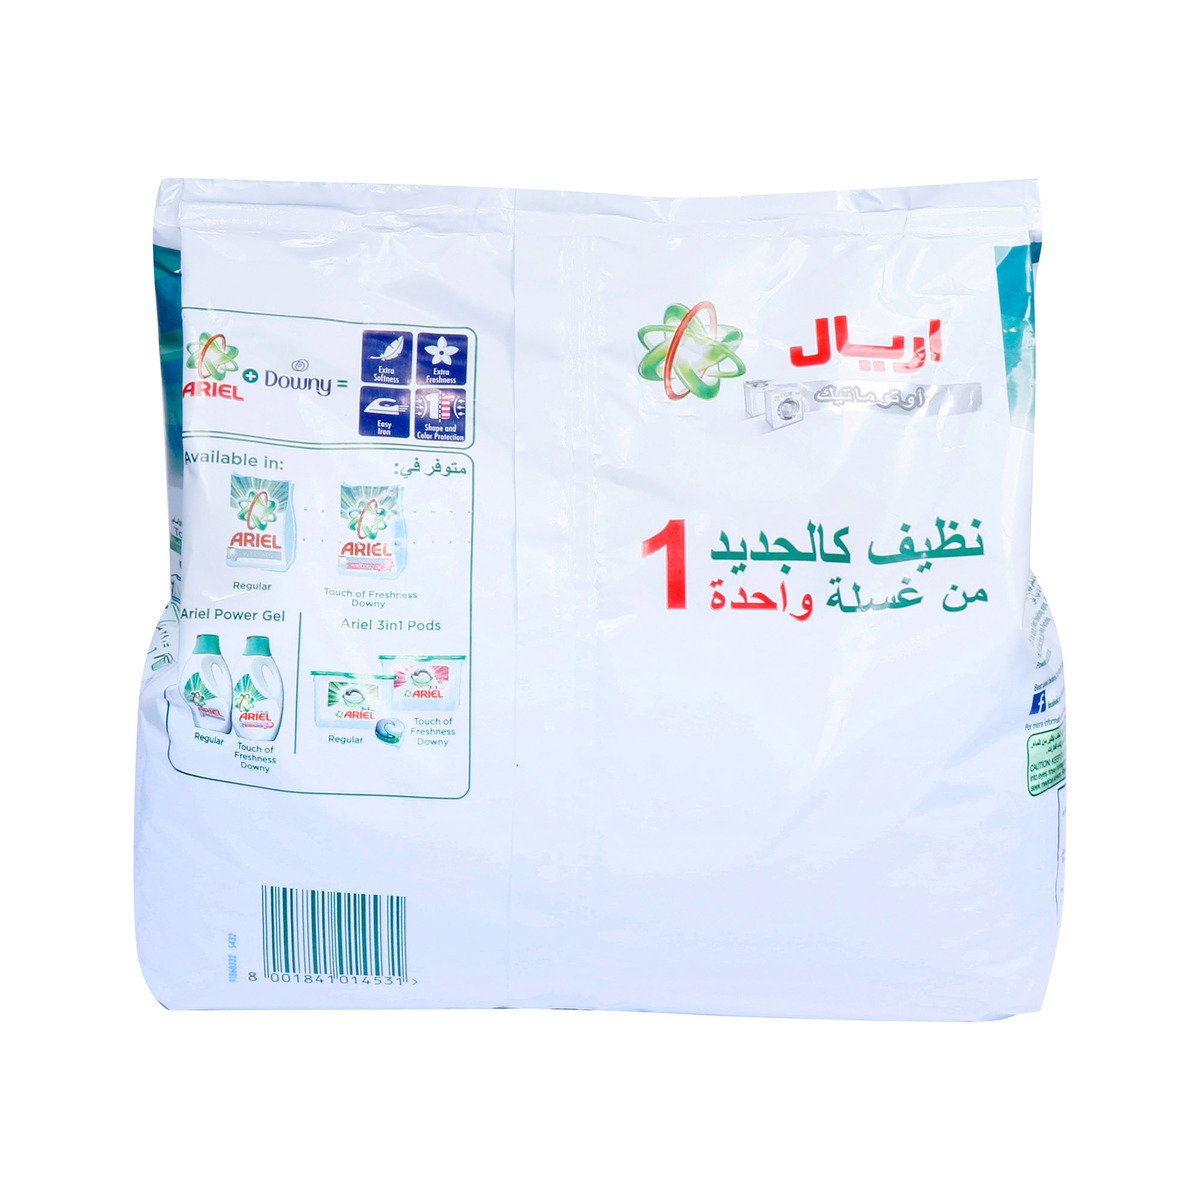 Ariel Automatic Washing Powder Front Load Concentrated 1.5kg